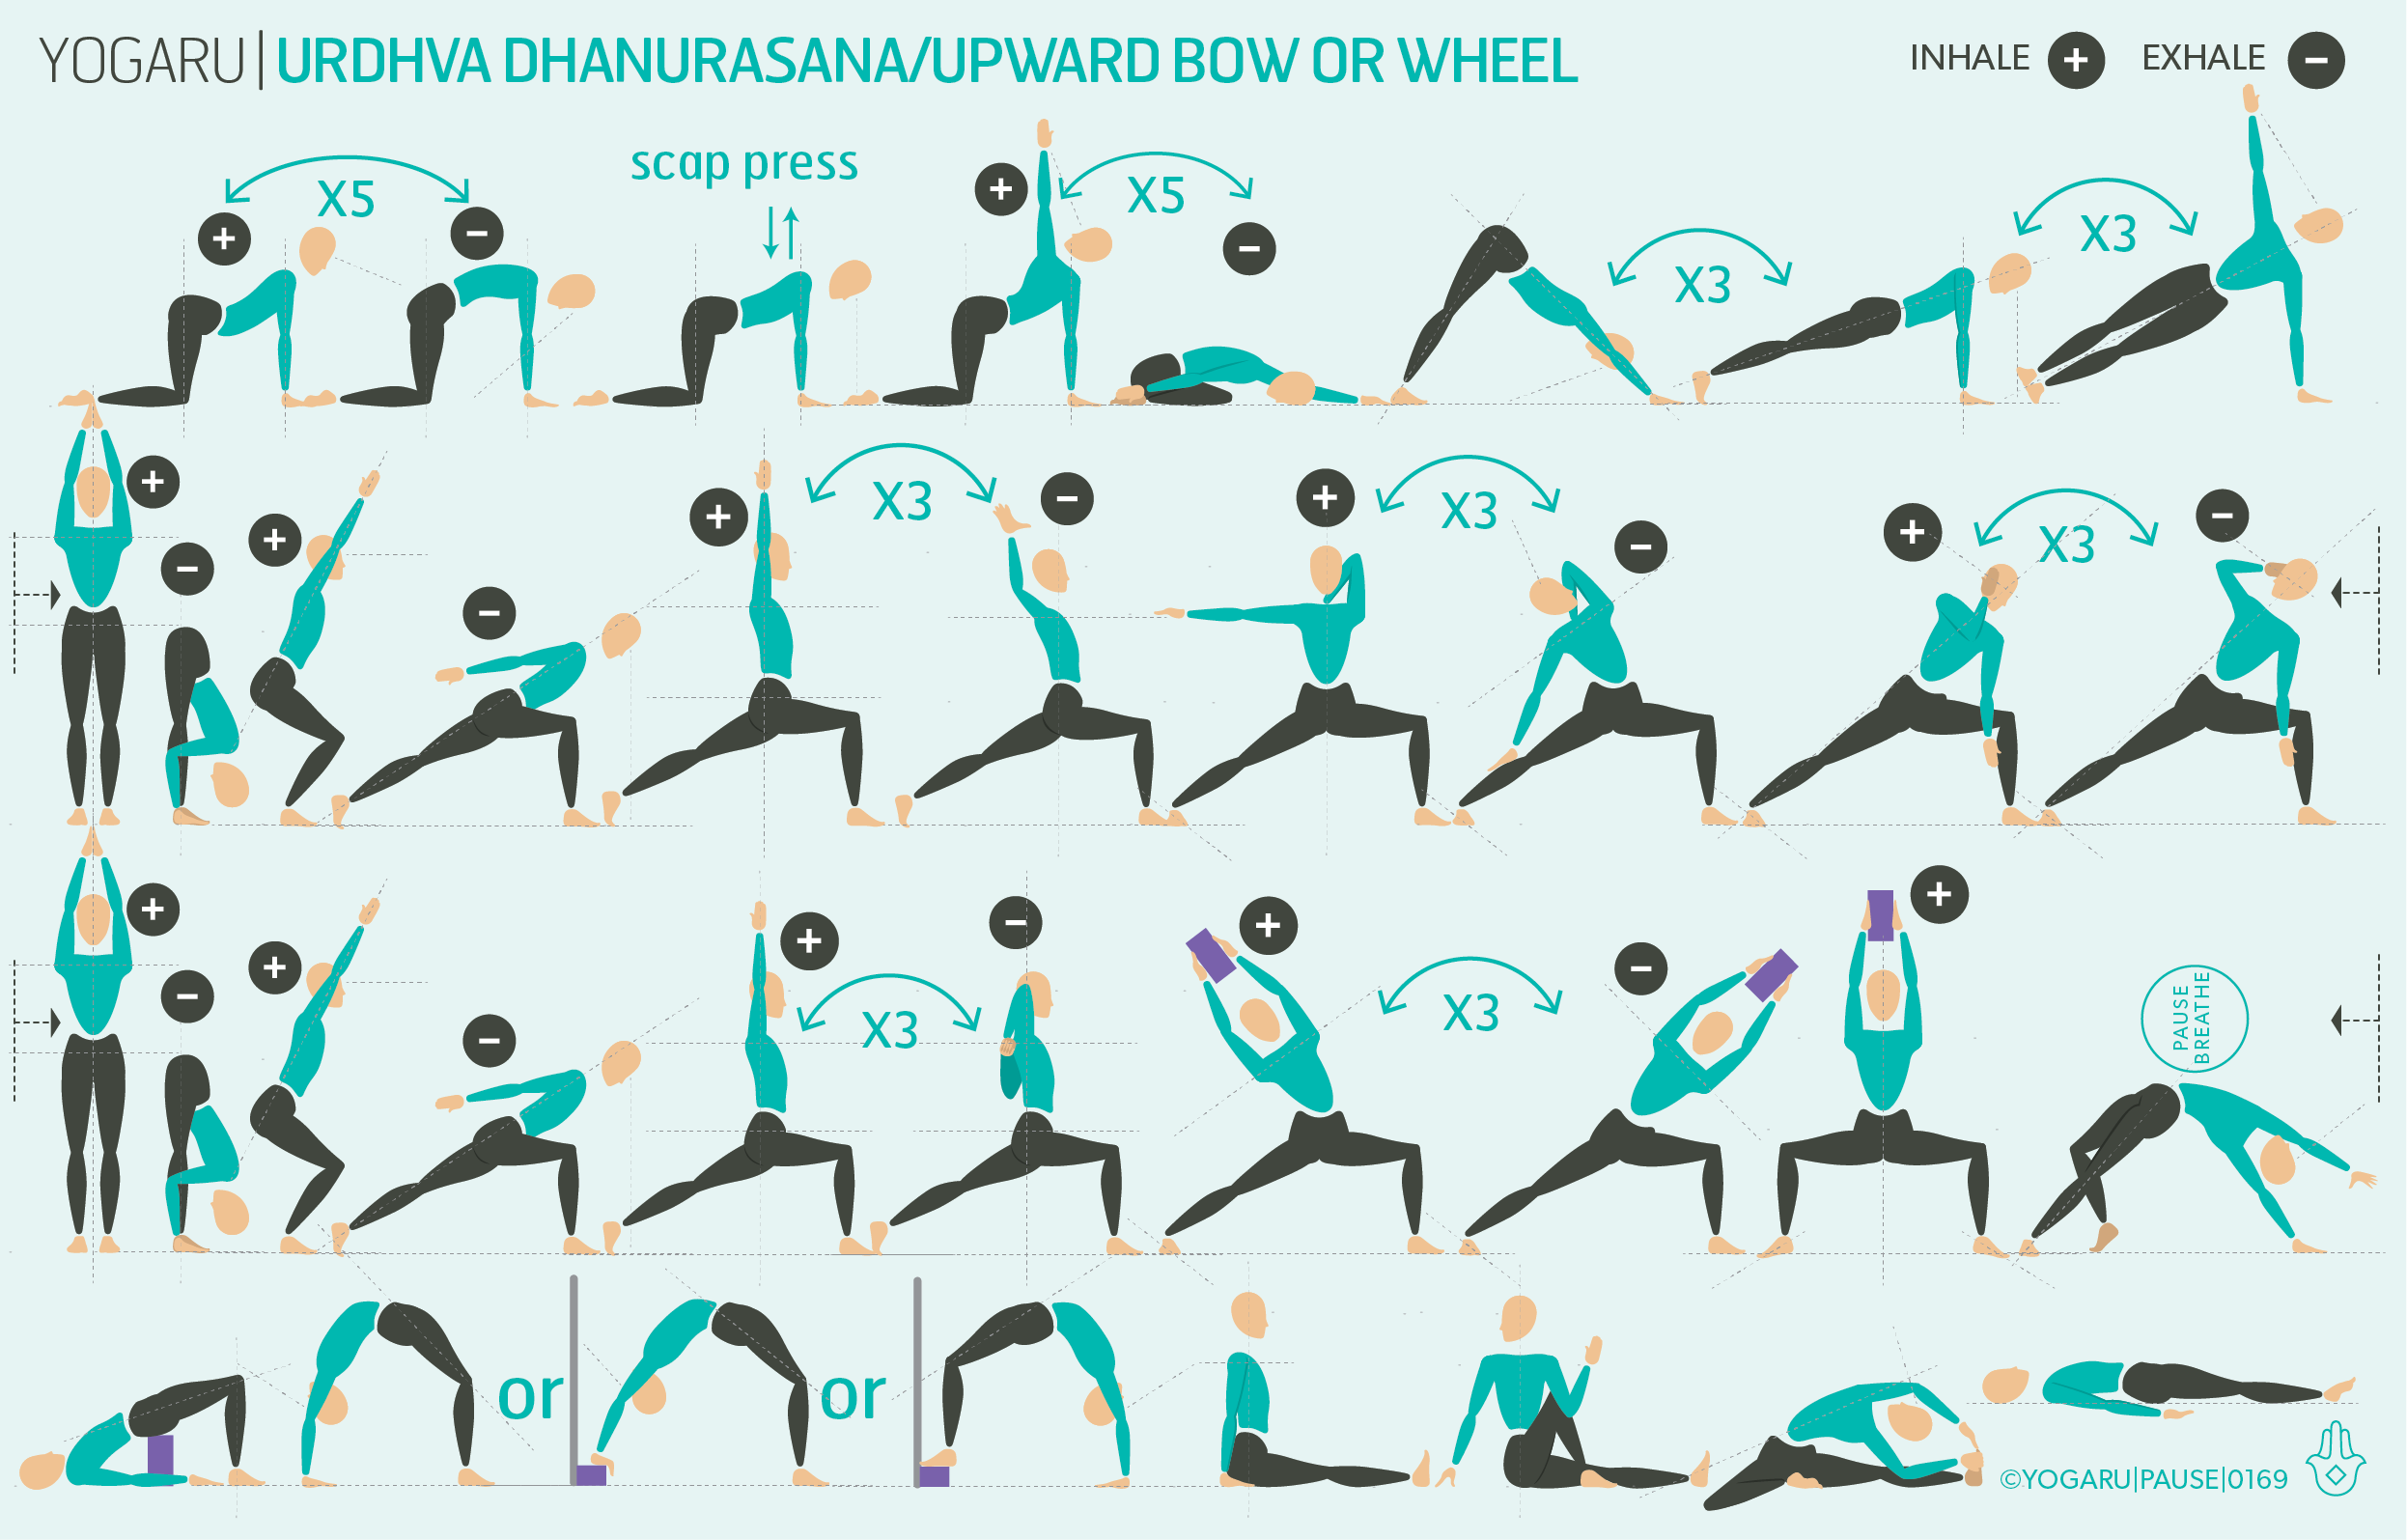 What is the wheel pose in yoga? - Quora